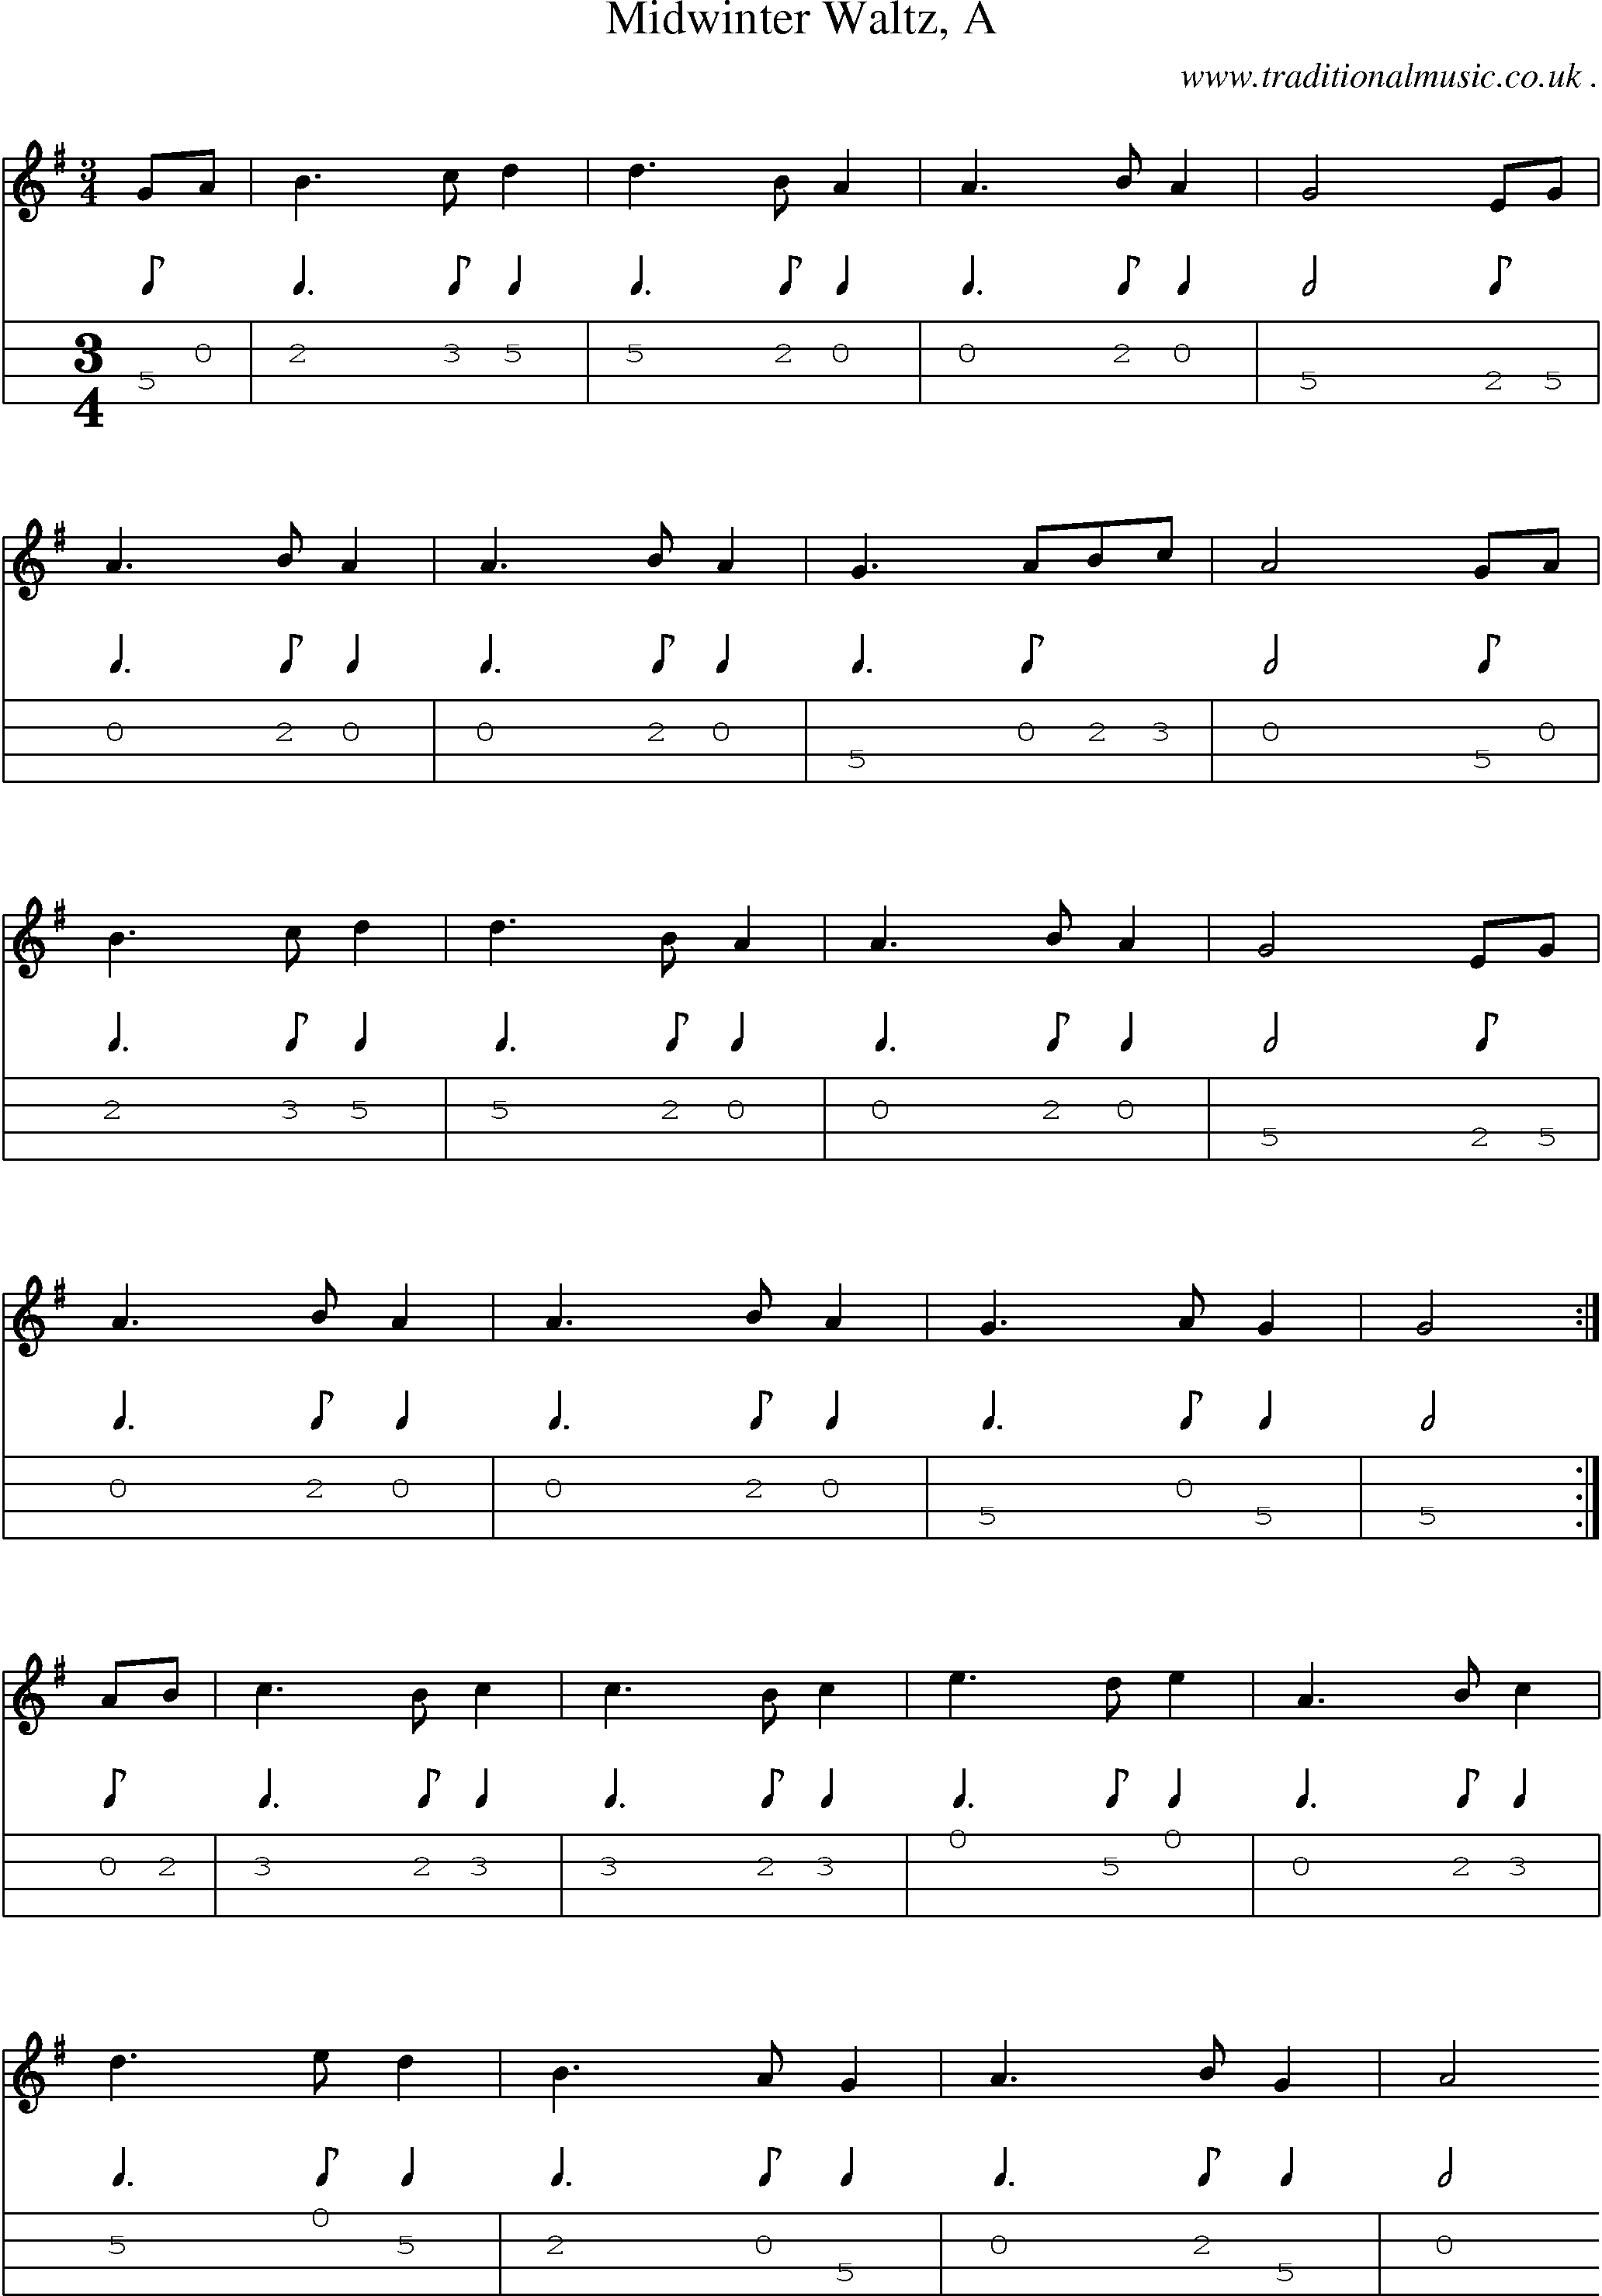 Sheet-music  score, Chords and Mandolin Tabs for Midwinter Waltz A